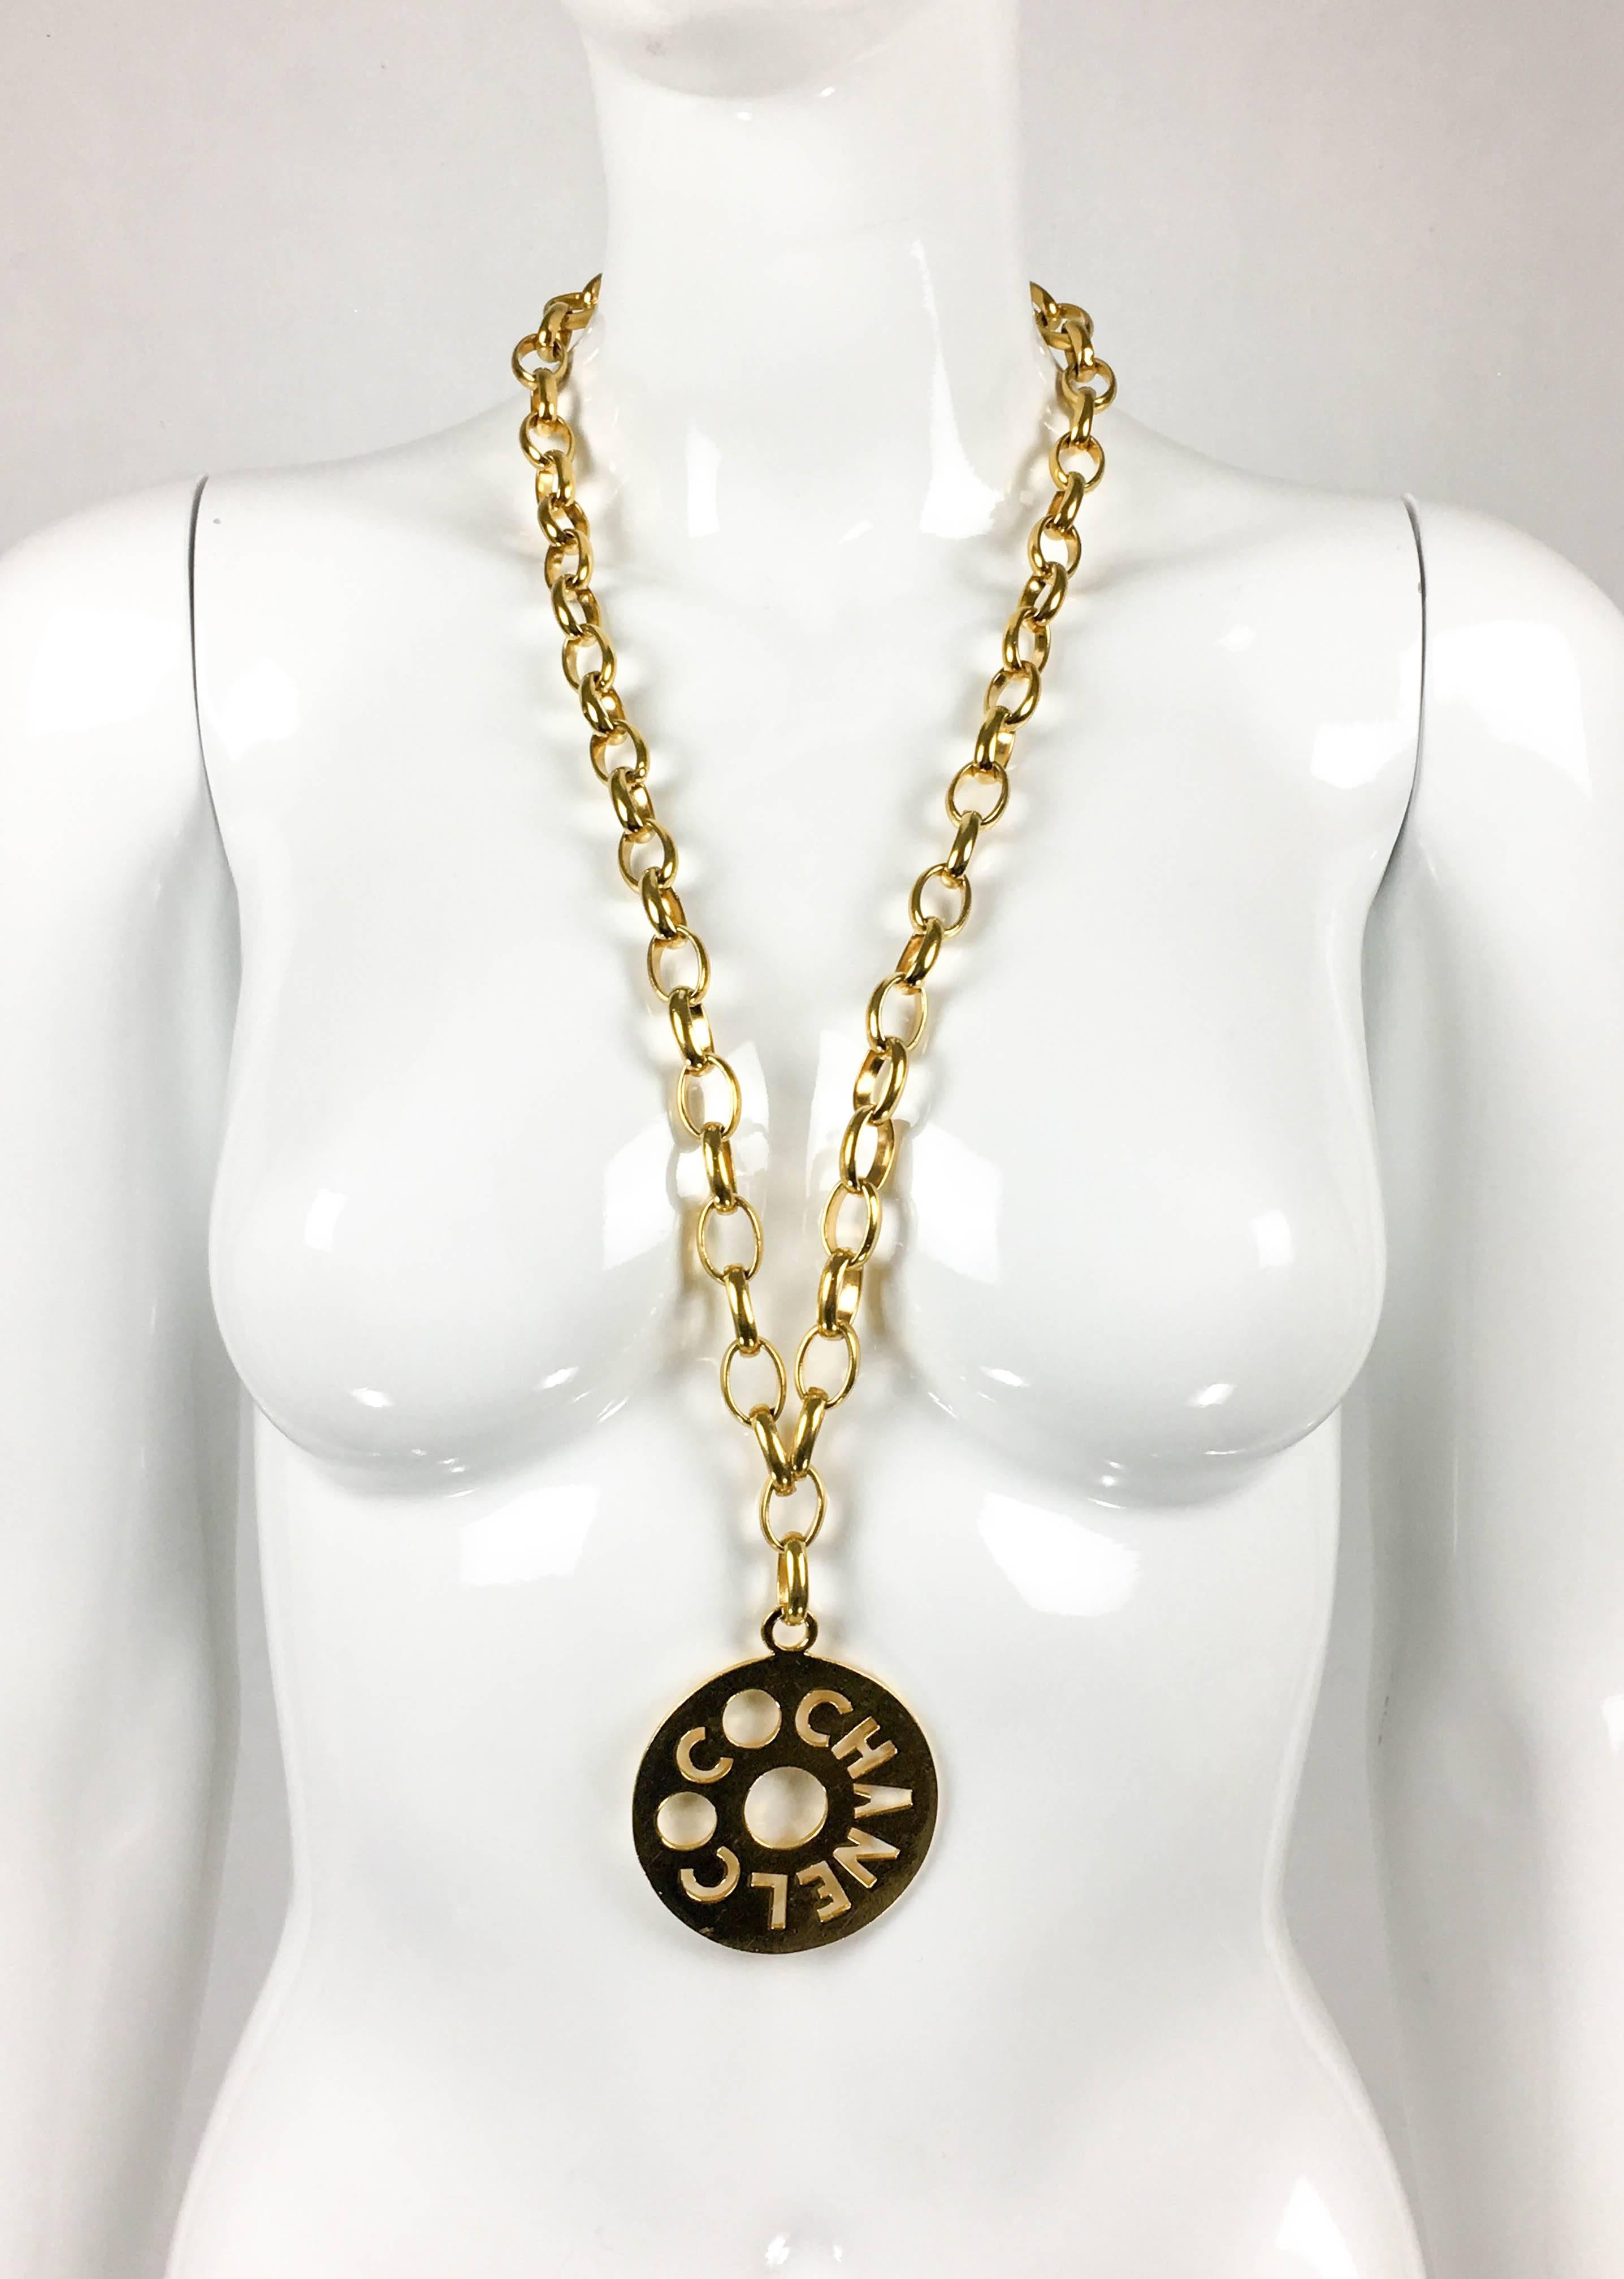 Women's Chanel Chunky Gold-Tone 'Coco Chanel' Disk Pendant Chain Necklace - 1970's